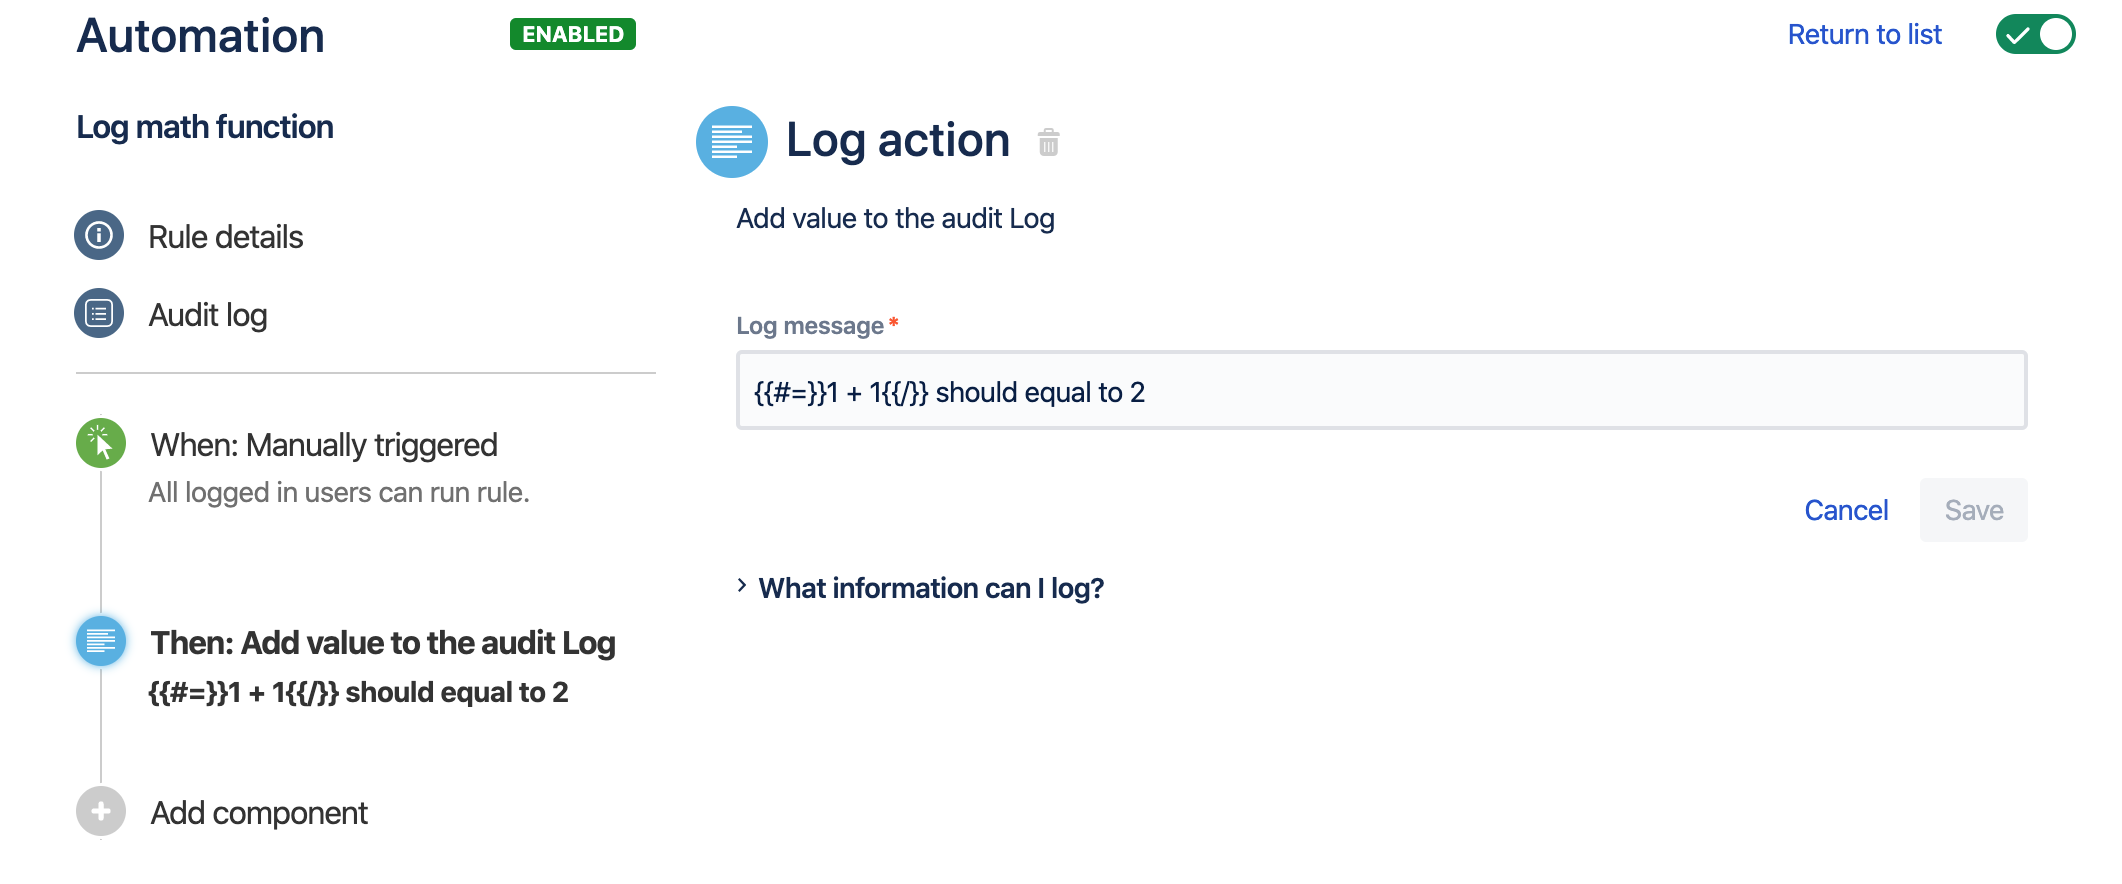 "Log" action for an automation rule. The value "{{#=}}1 + 1{{/}} should equal to 2" is entered in the "Log message" field